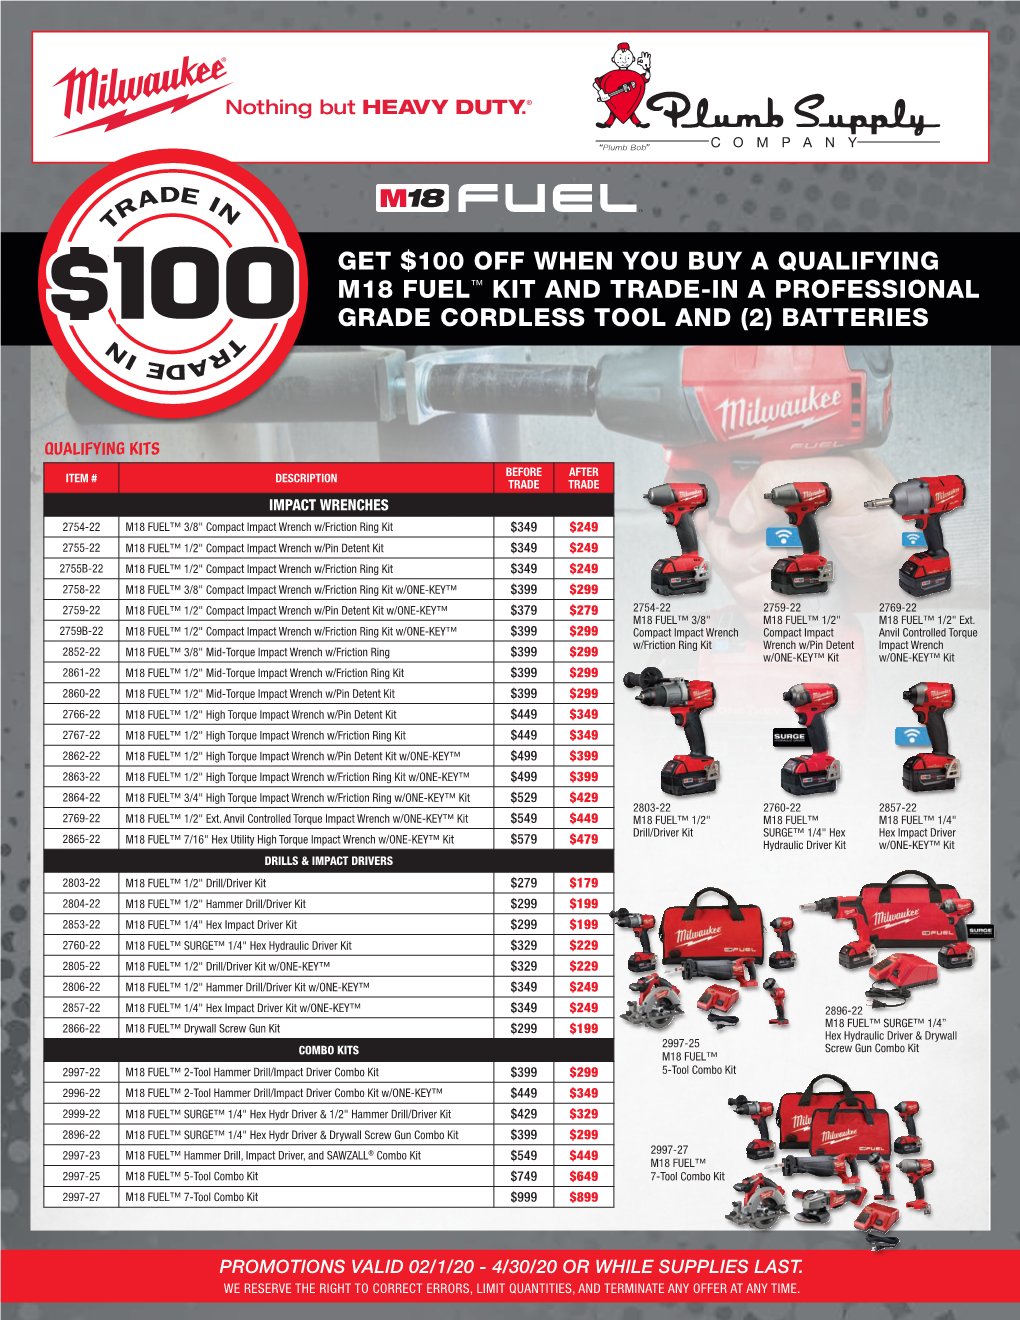 Get $100 Off When You Buy a Qualifying M18 Fuel™ Kit and Trade-In a Professional Grade Cordless Tool and (2) Batteries